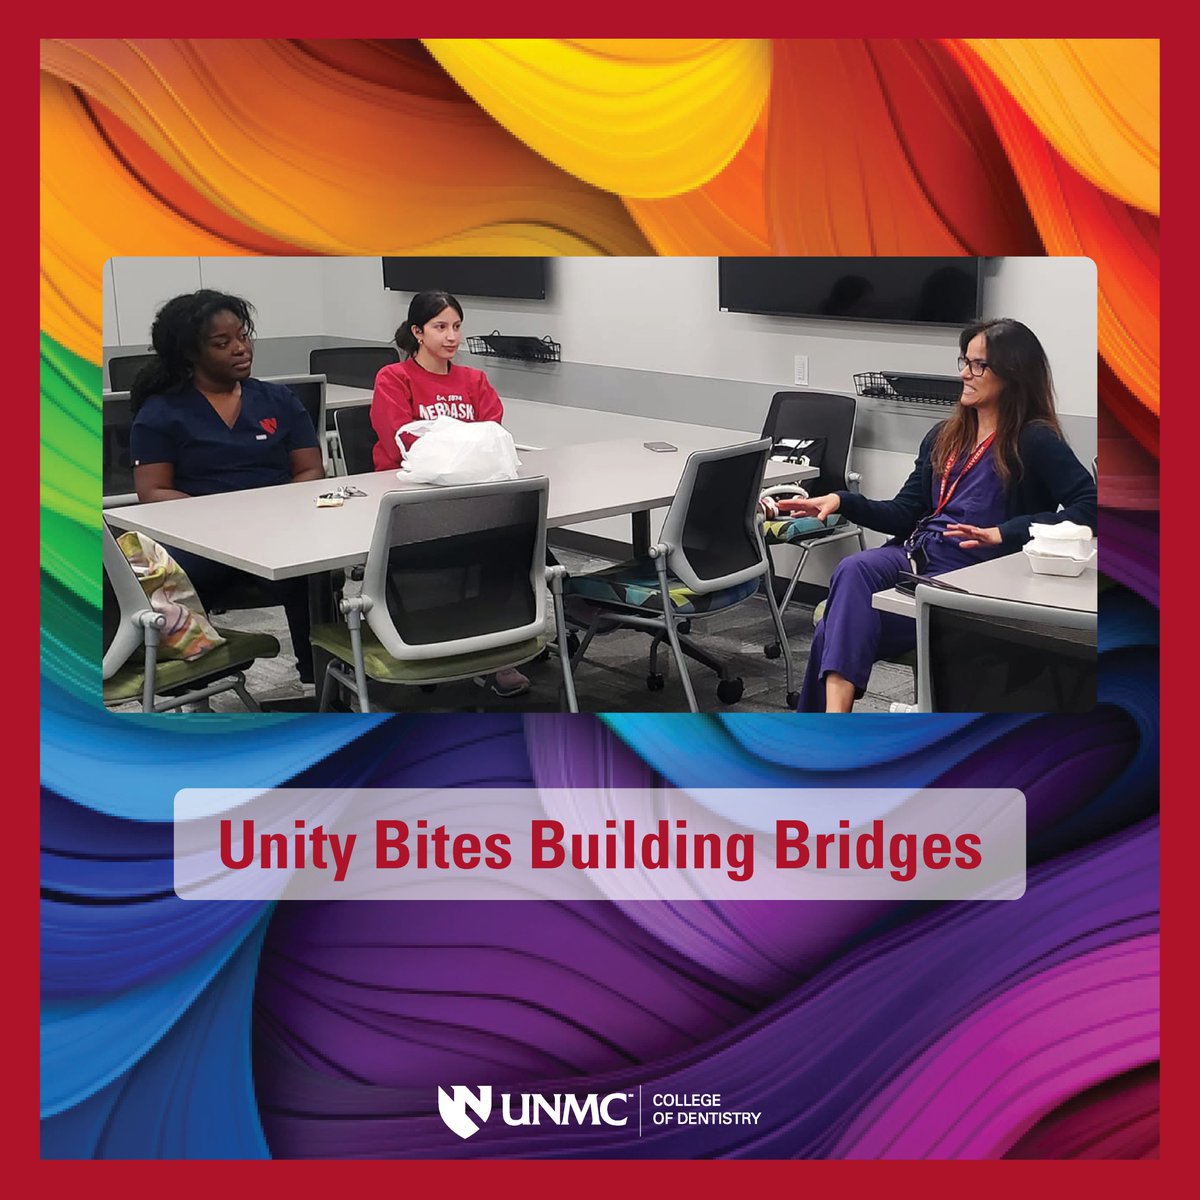 Our first 'Unity Bites Building Bridges' was a very special event. Students, faculty & staff shared stories about their backgrounds & their journeys to dentistry. Participants gained new perspectives & got to know each other. Sponsored by the College's DEI Committee. #iamunmc